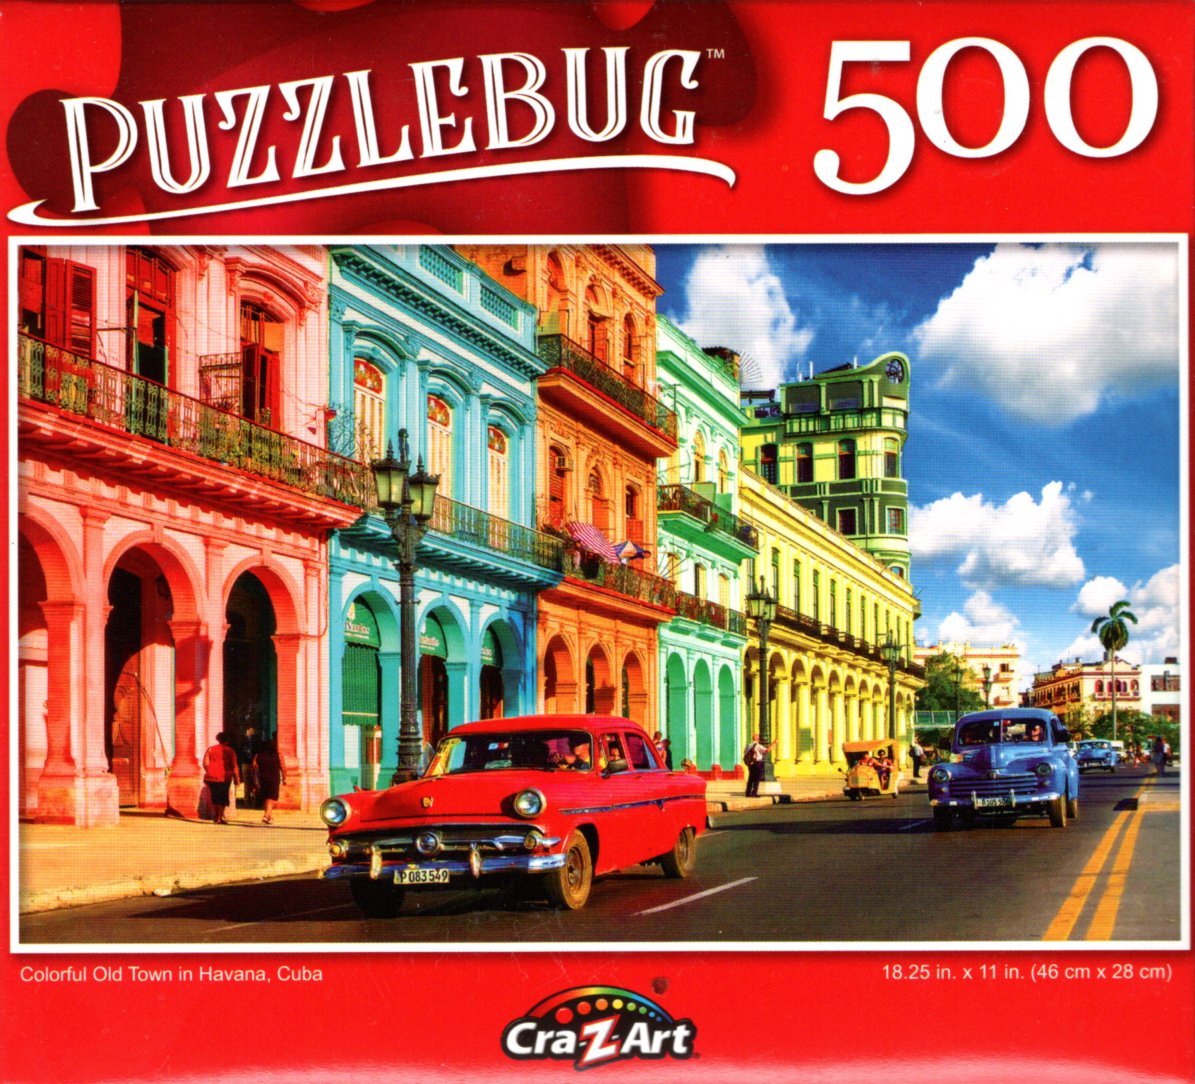 Puzzlebug Colorful Old Town in Havana, Cuba - 500 Pieces Jigsaw Puzzle